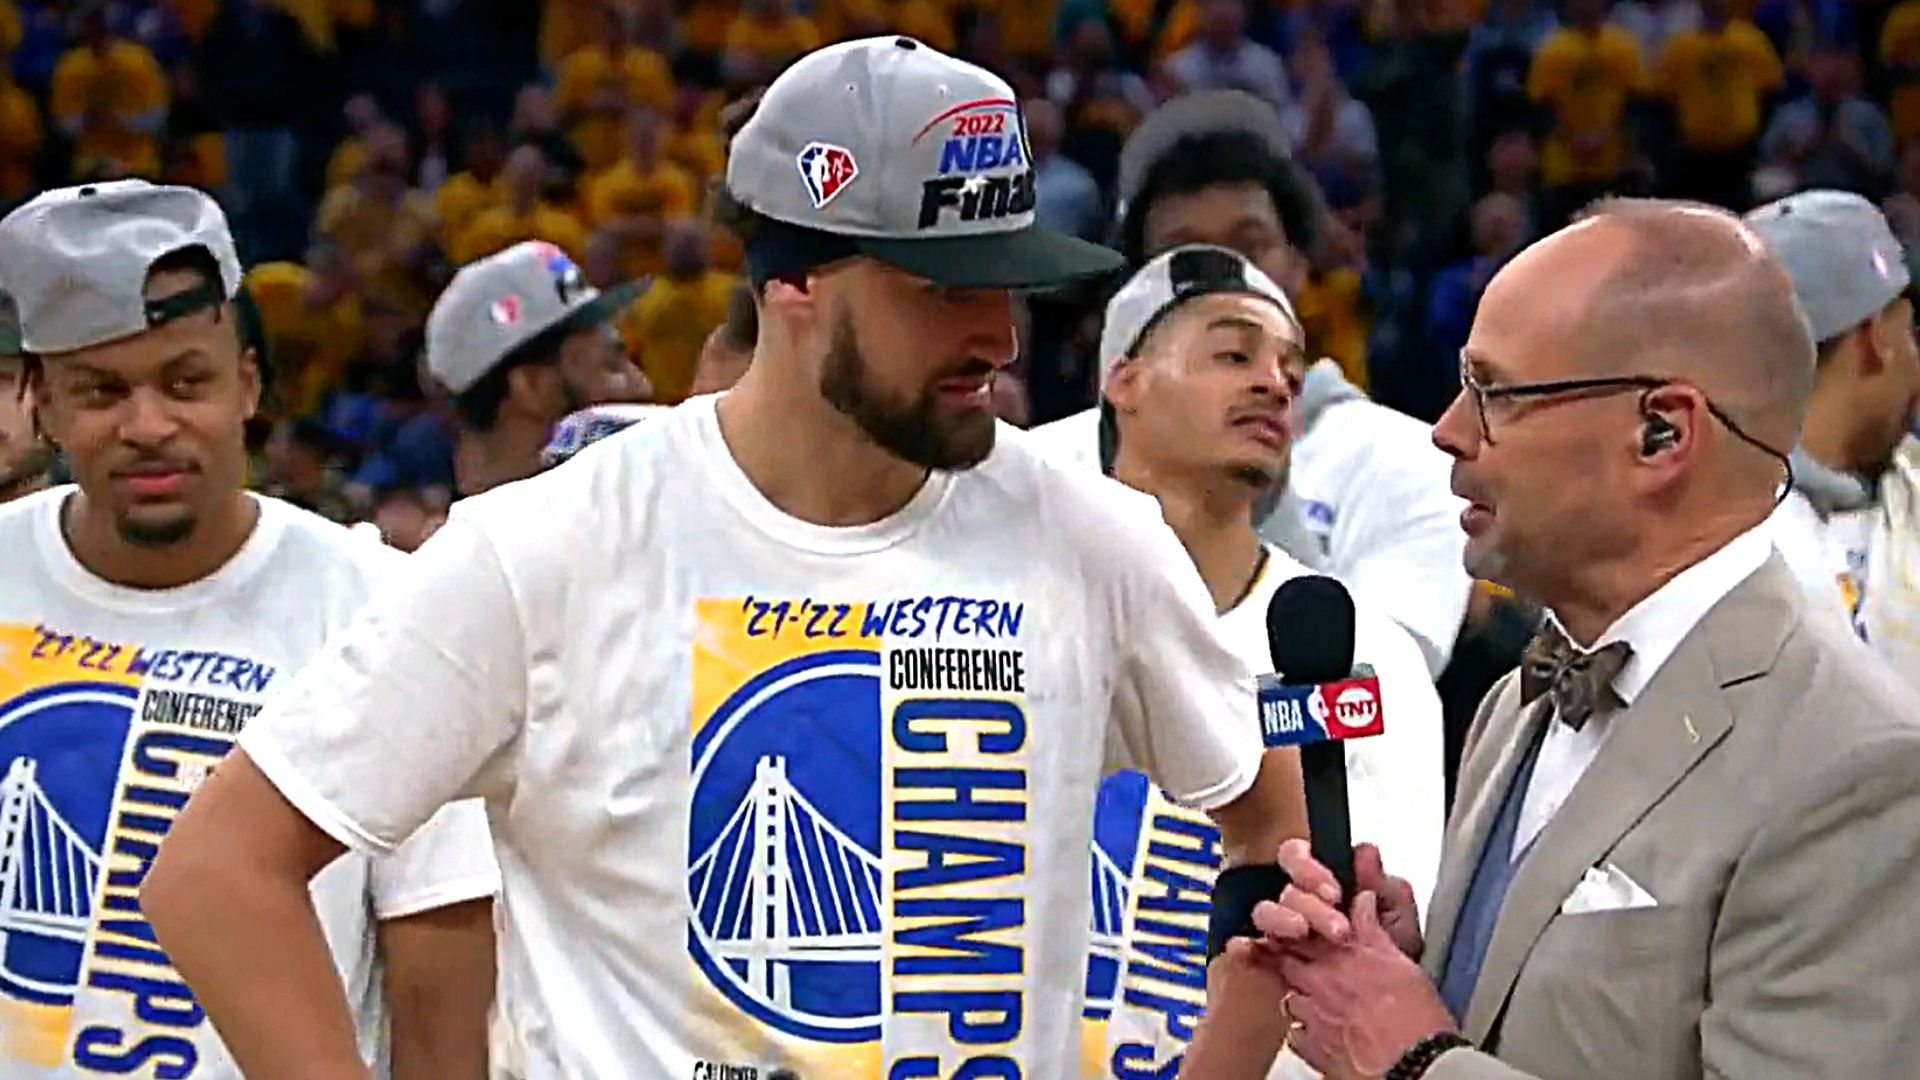 Klay Thompson in conversation with Ernie Johnson